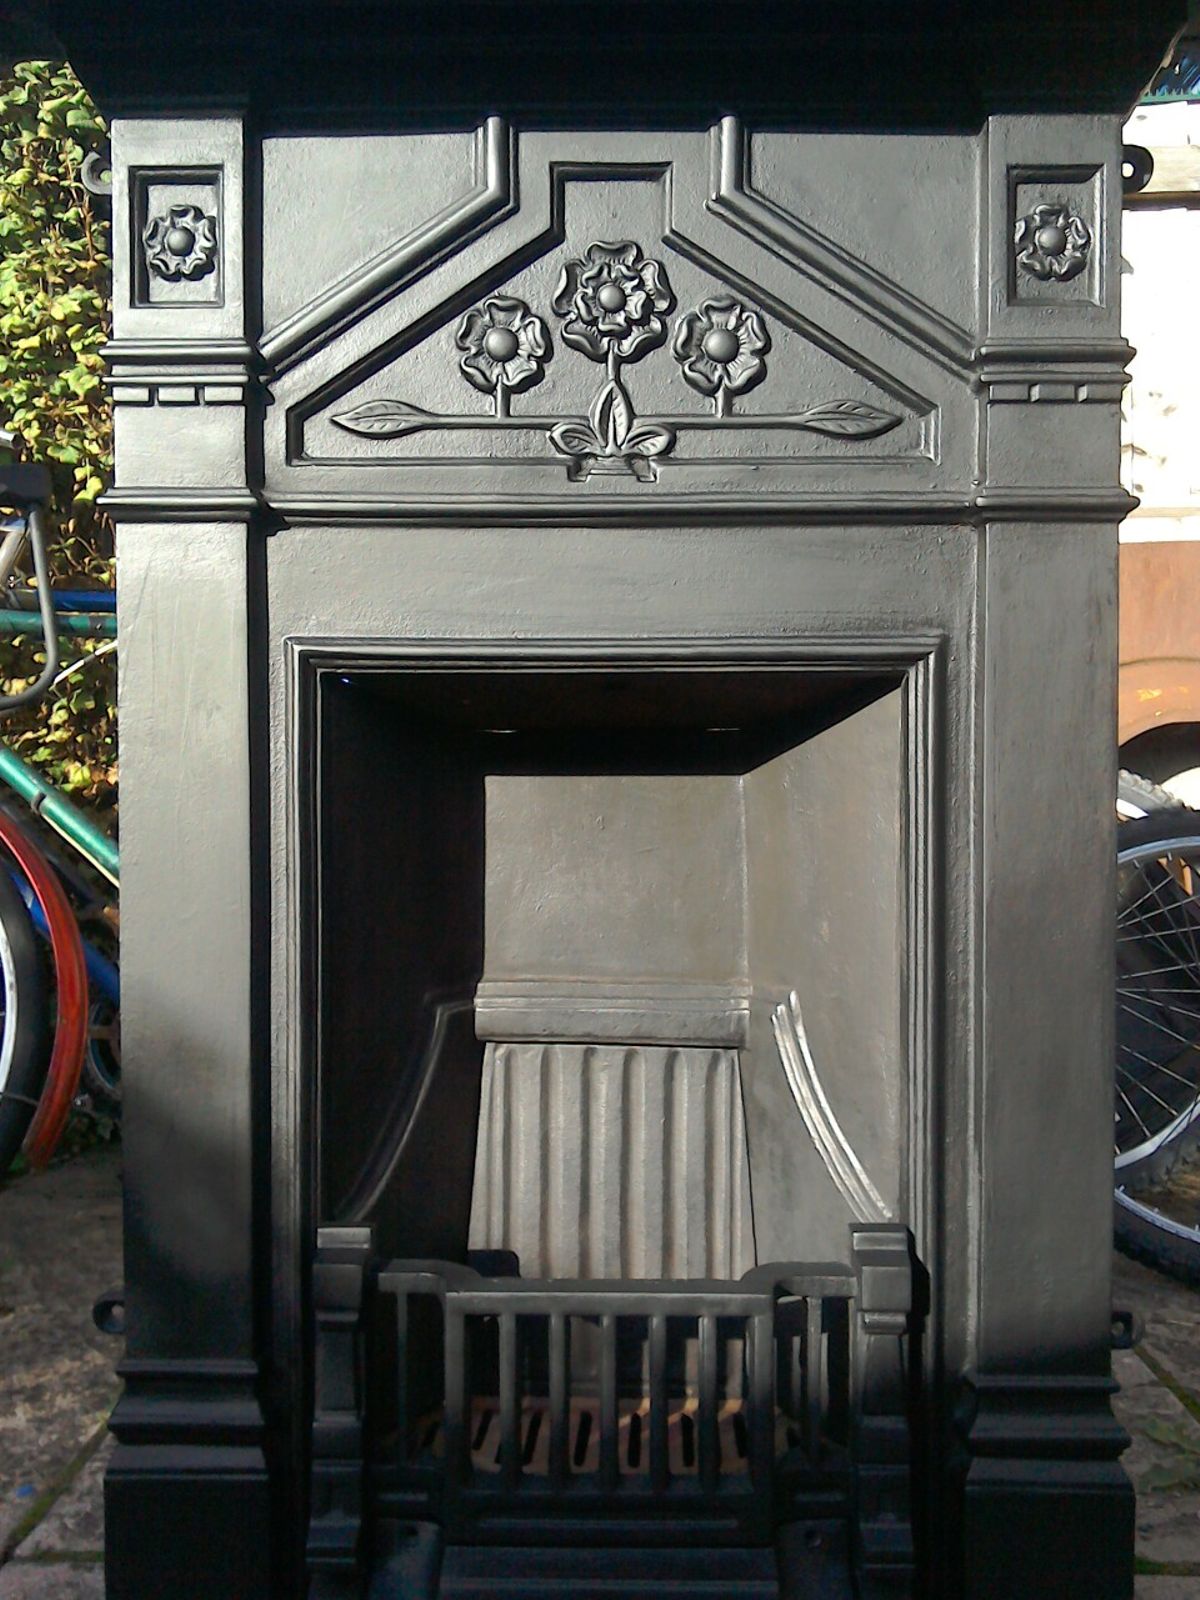 Metal Fireplace Mantel Inspirational Cast Iron Fireplace In Ln5 Lincoln for £150 00 for Sale